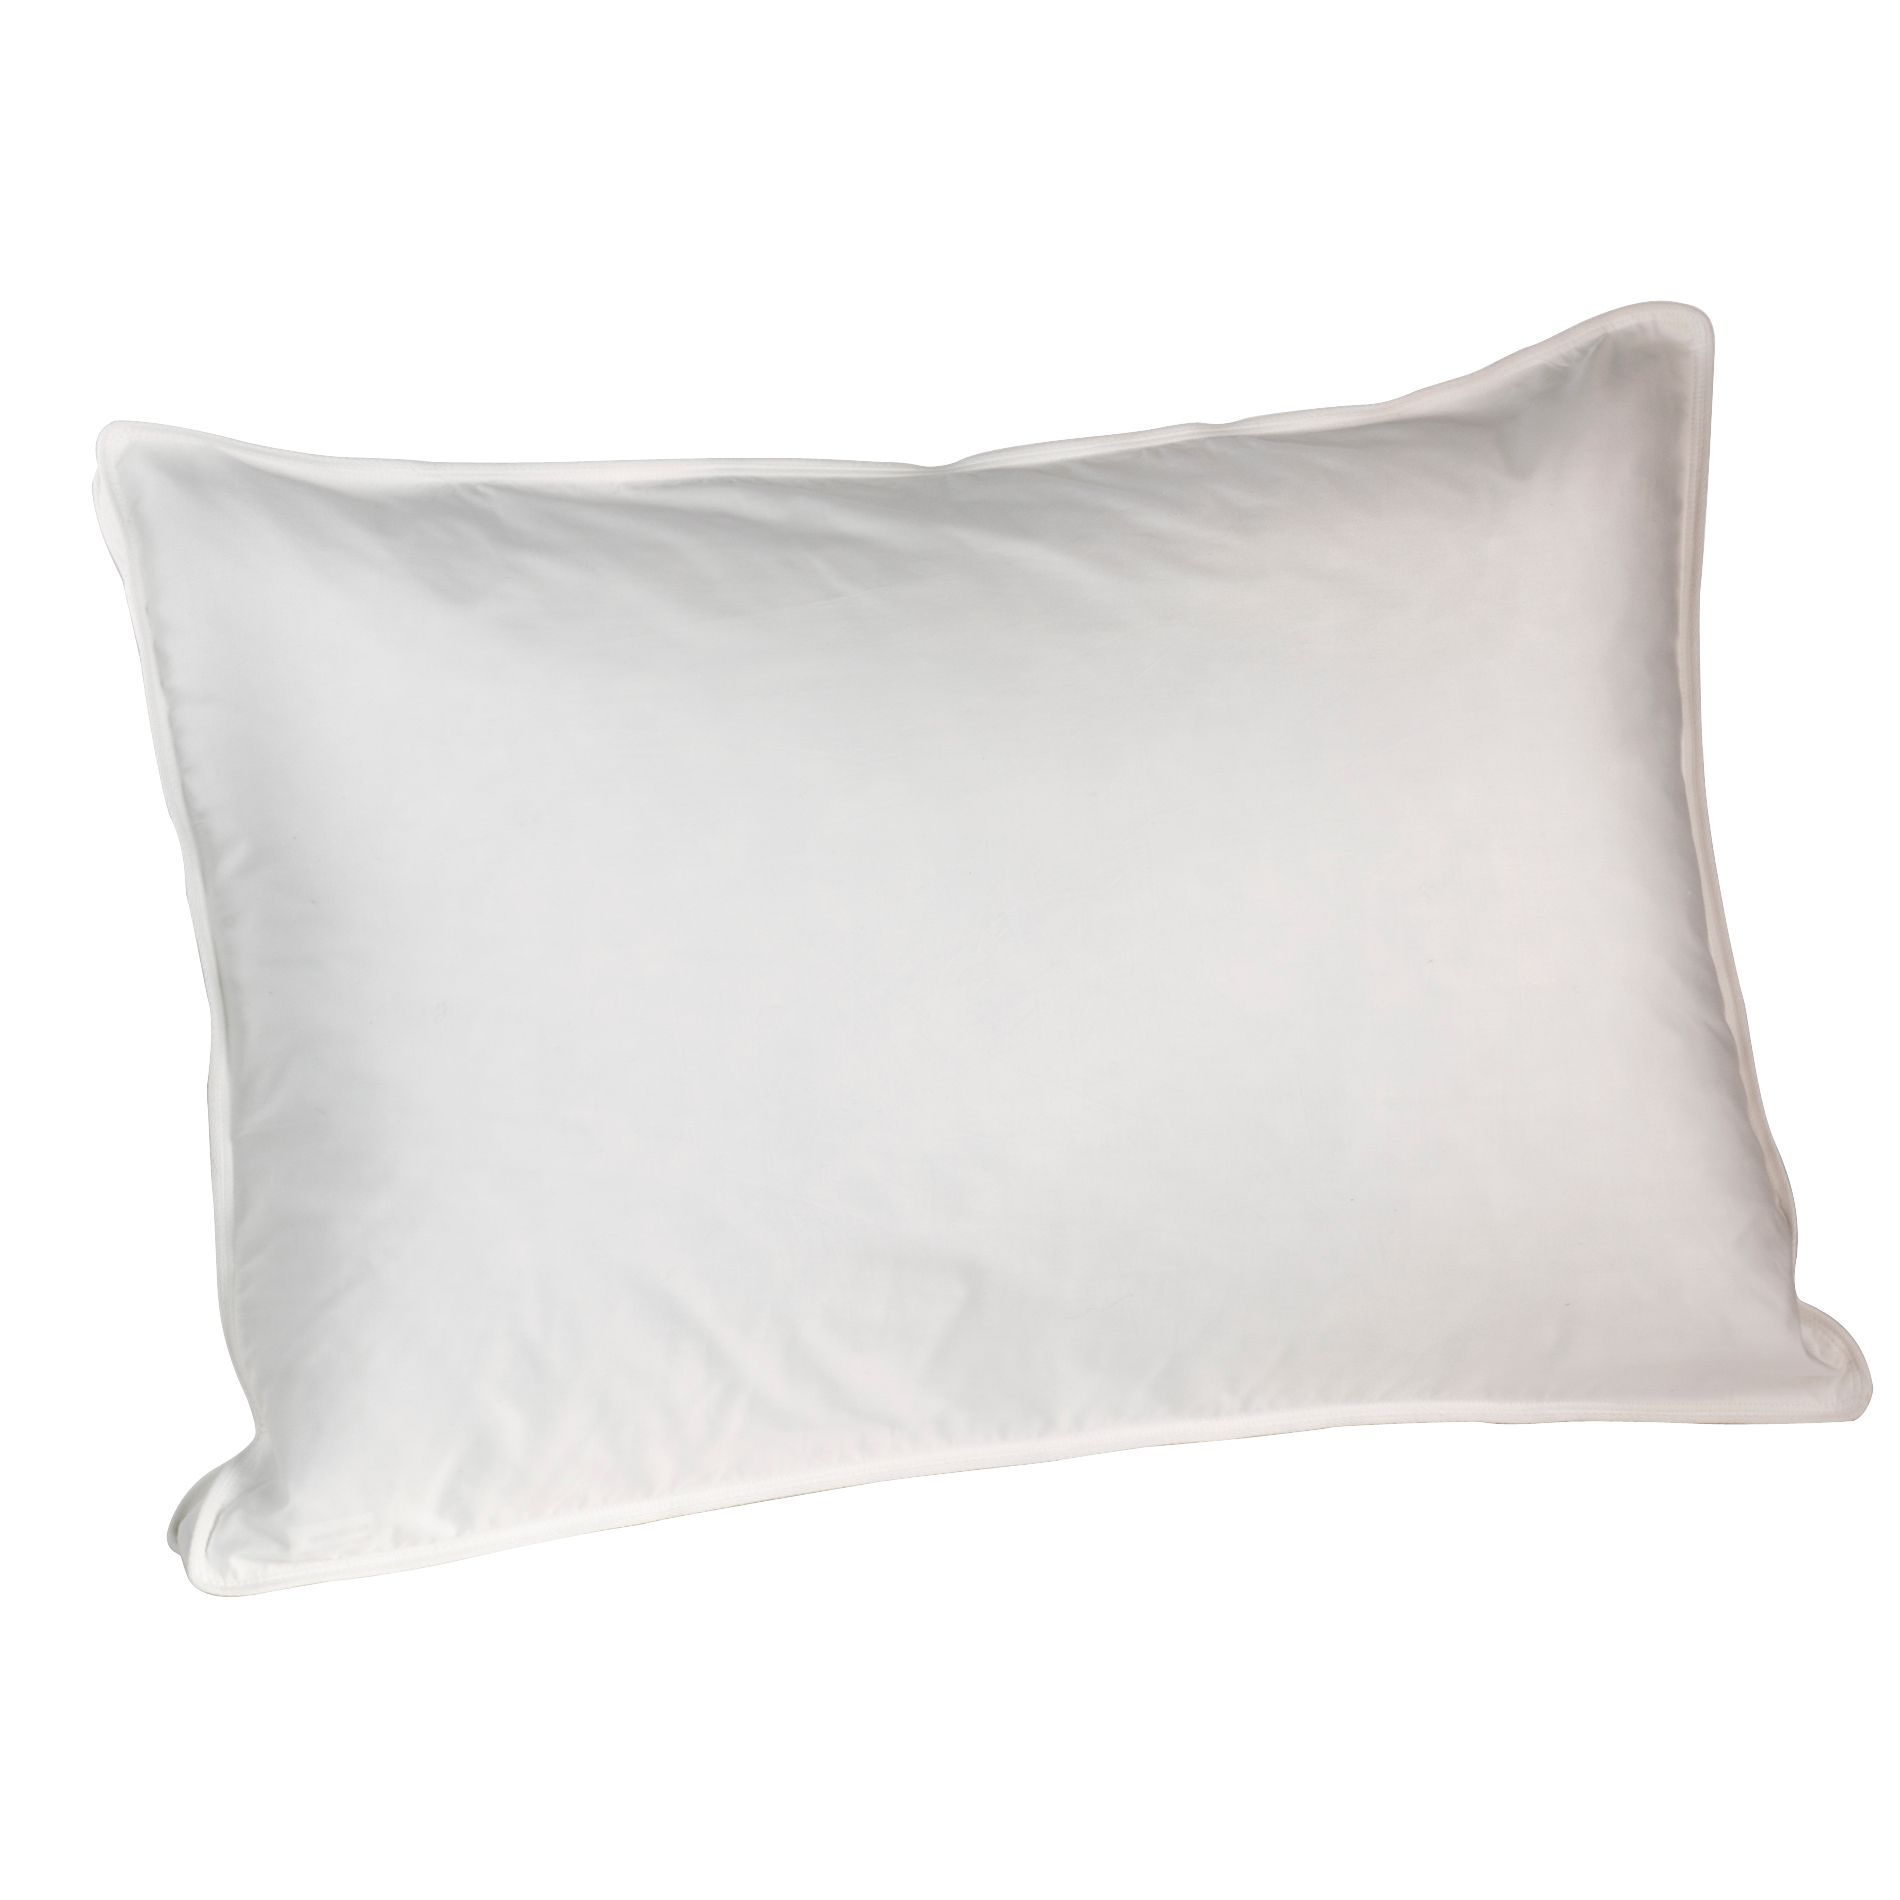 Gussetted Feather Pillow